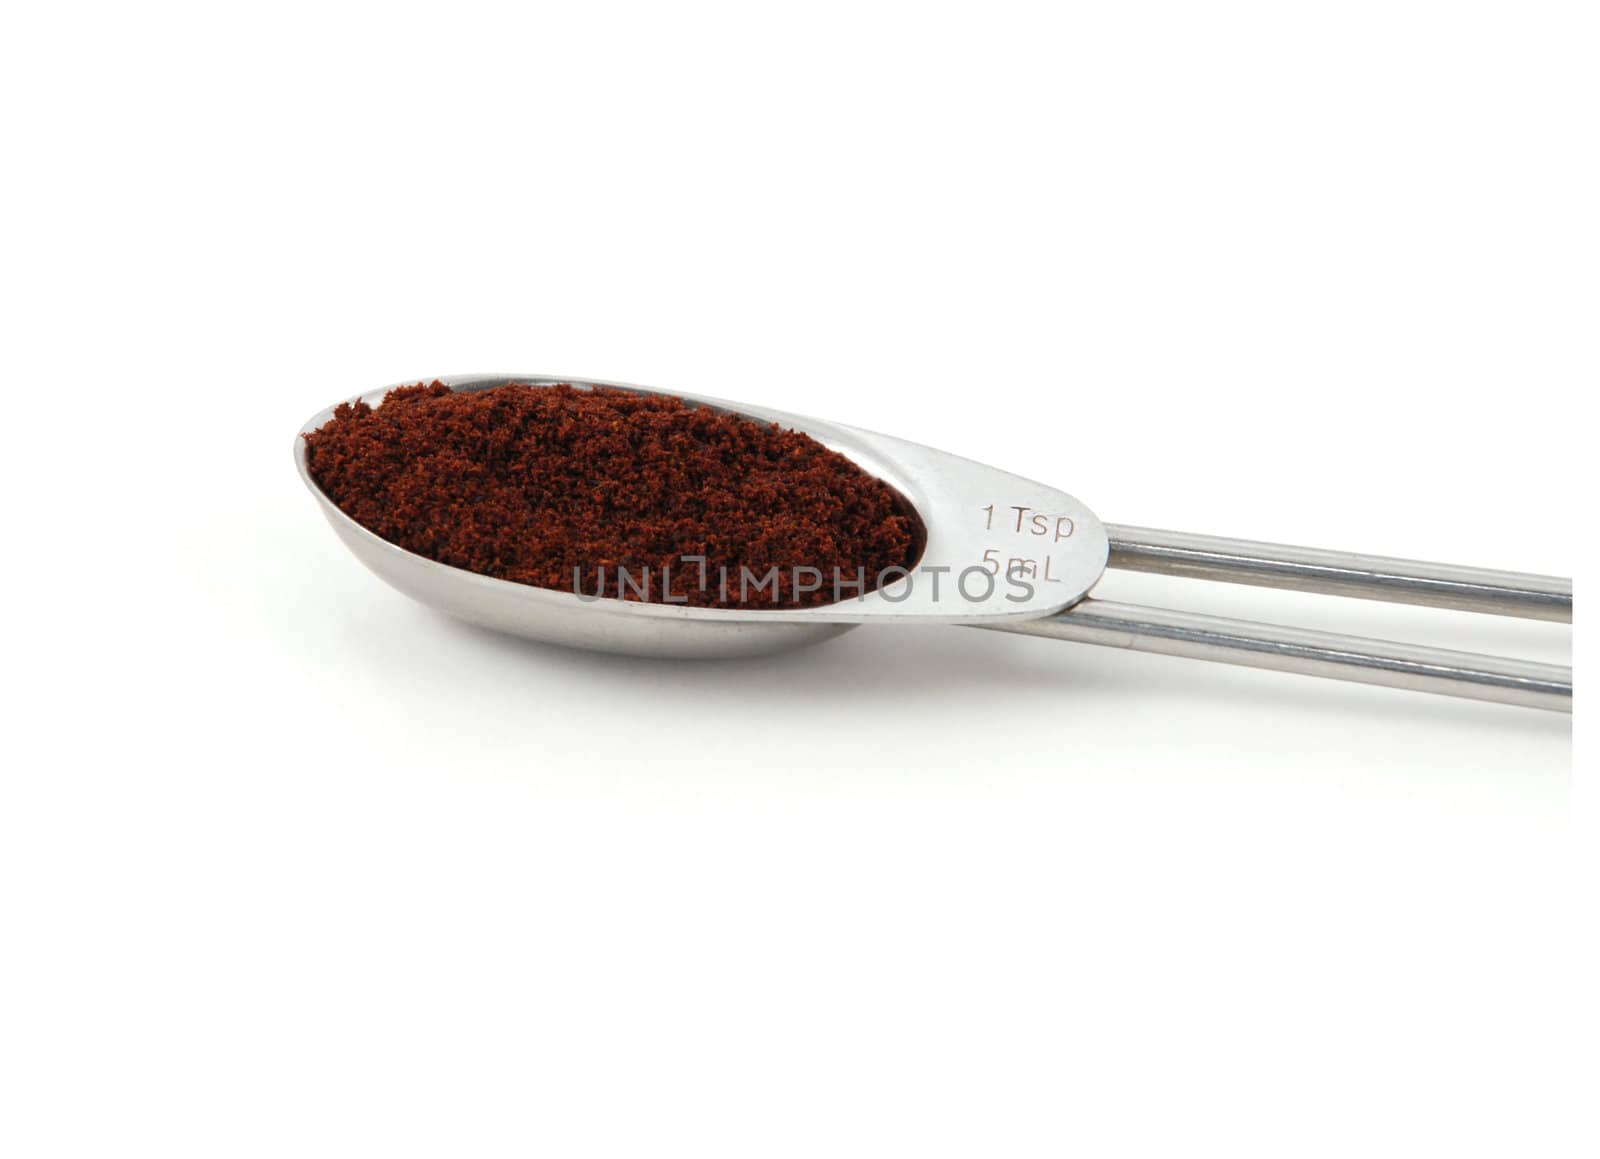 Ground cloves measured in a metal teaspoon, isolated on a white background